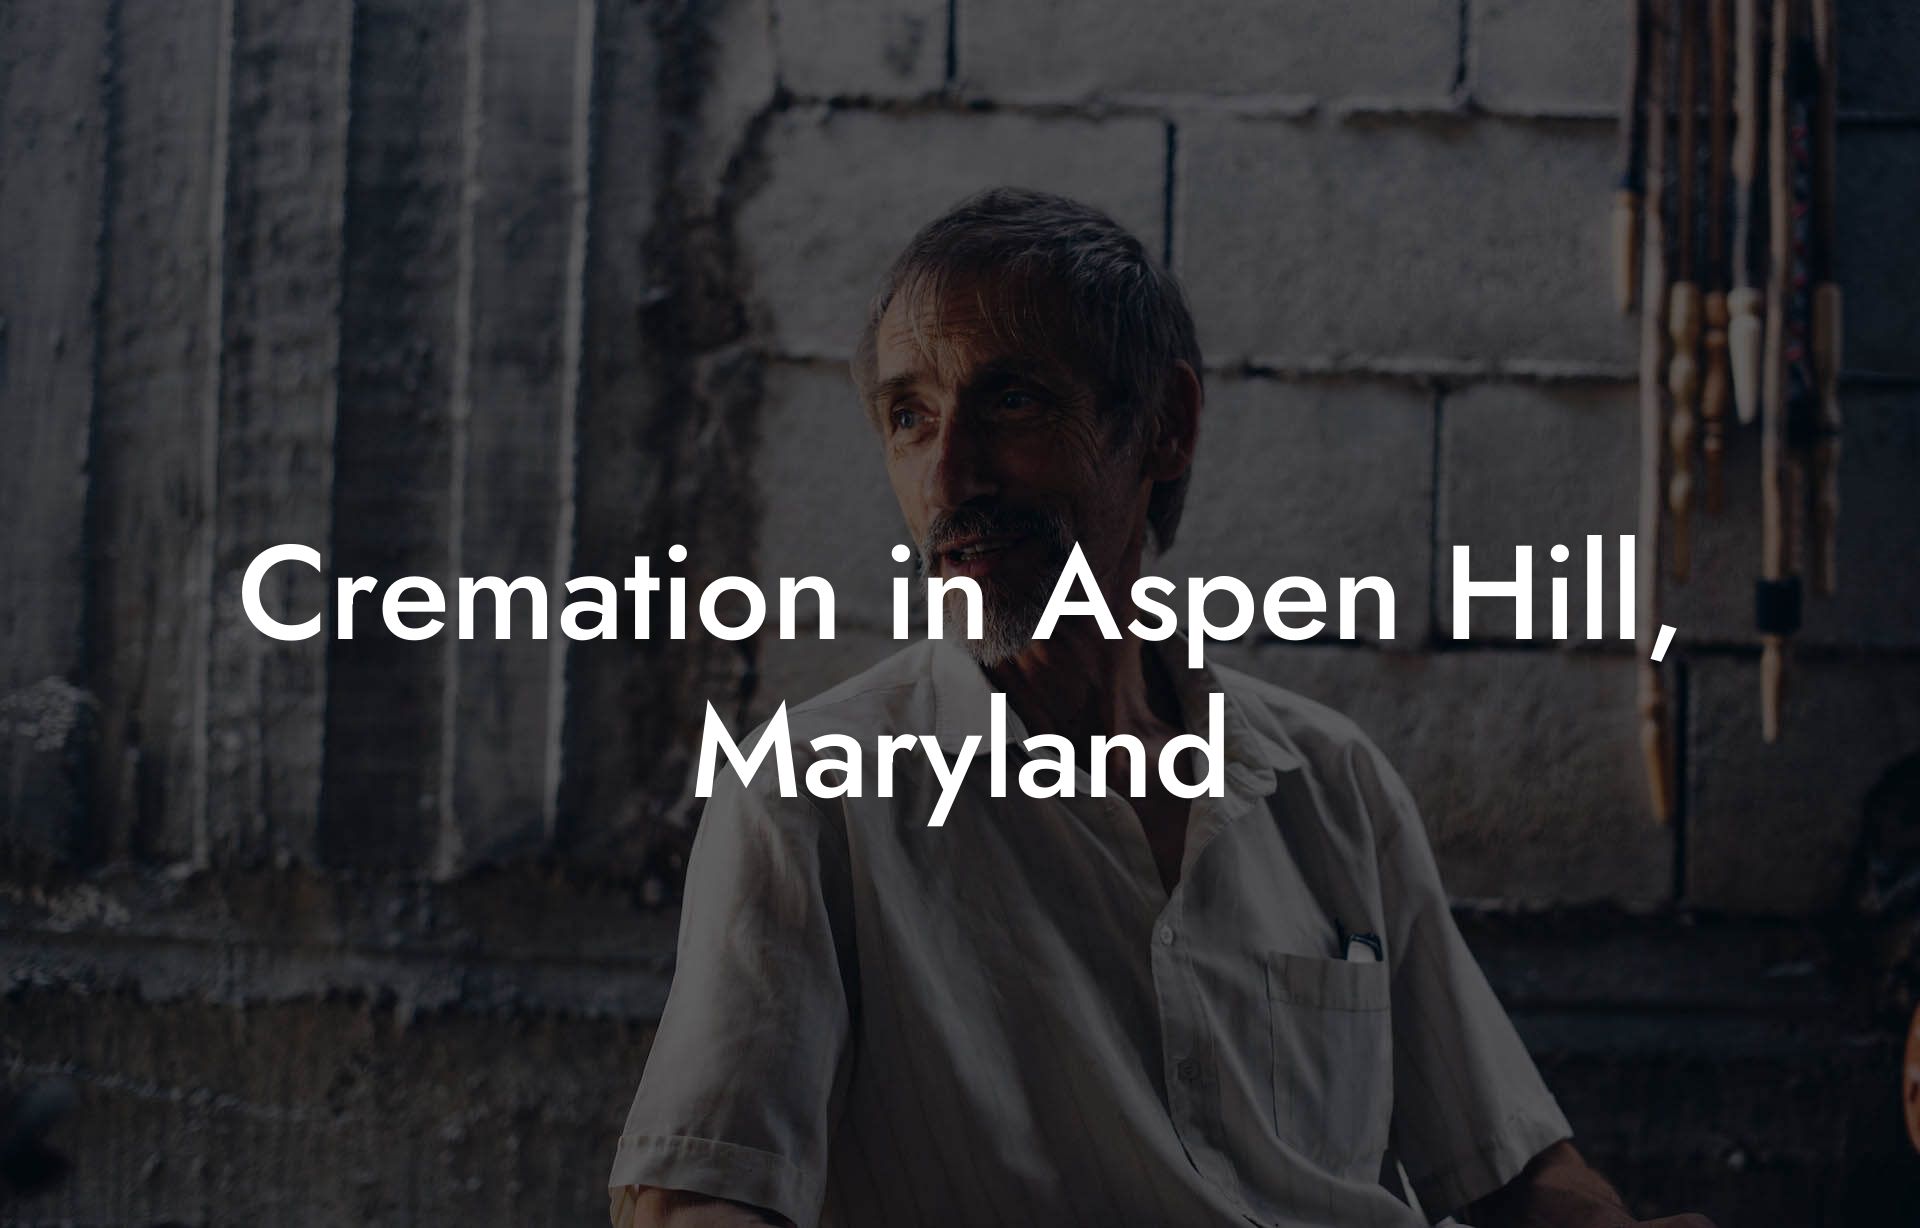 Cremation in Aspen Hill, Maryland